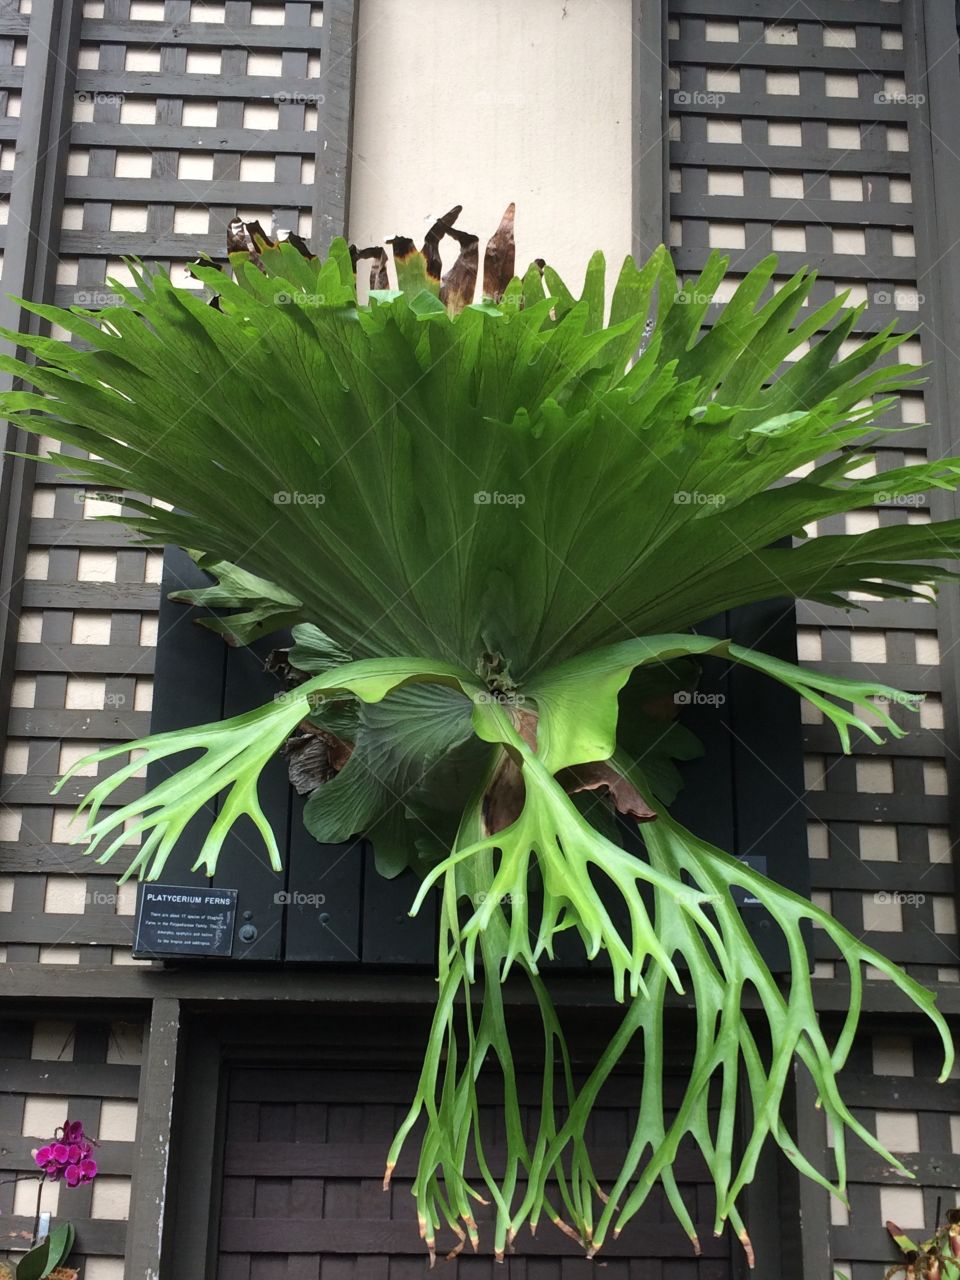 Vegan wall mount
(Or)
Neat plant